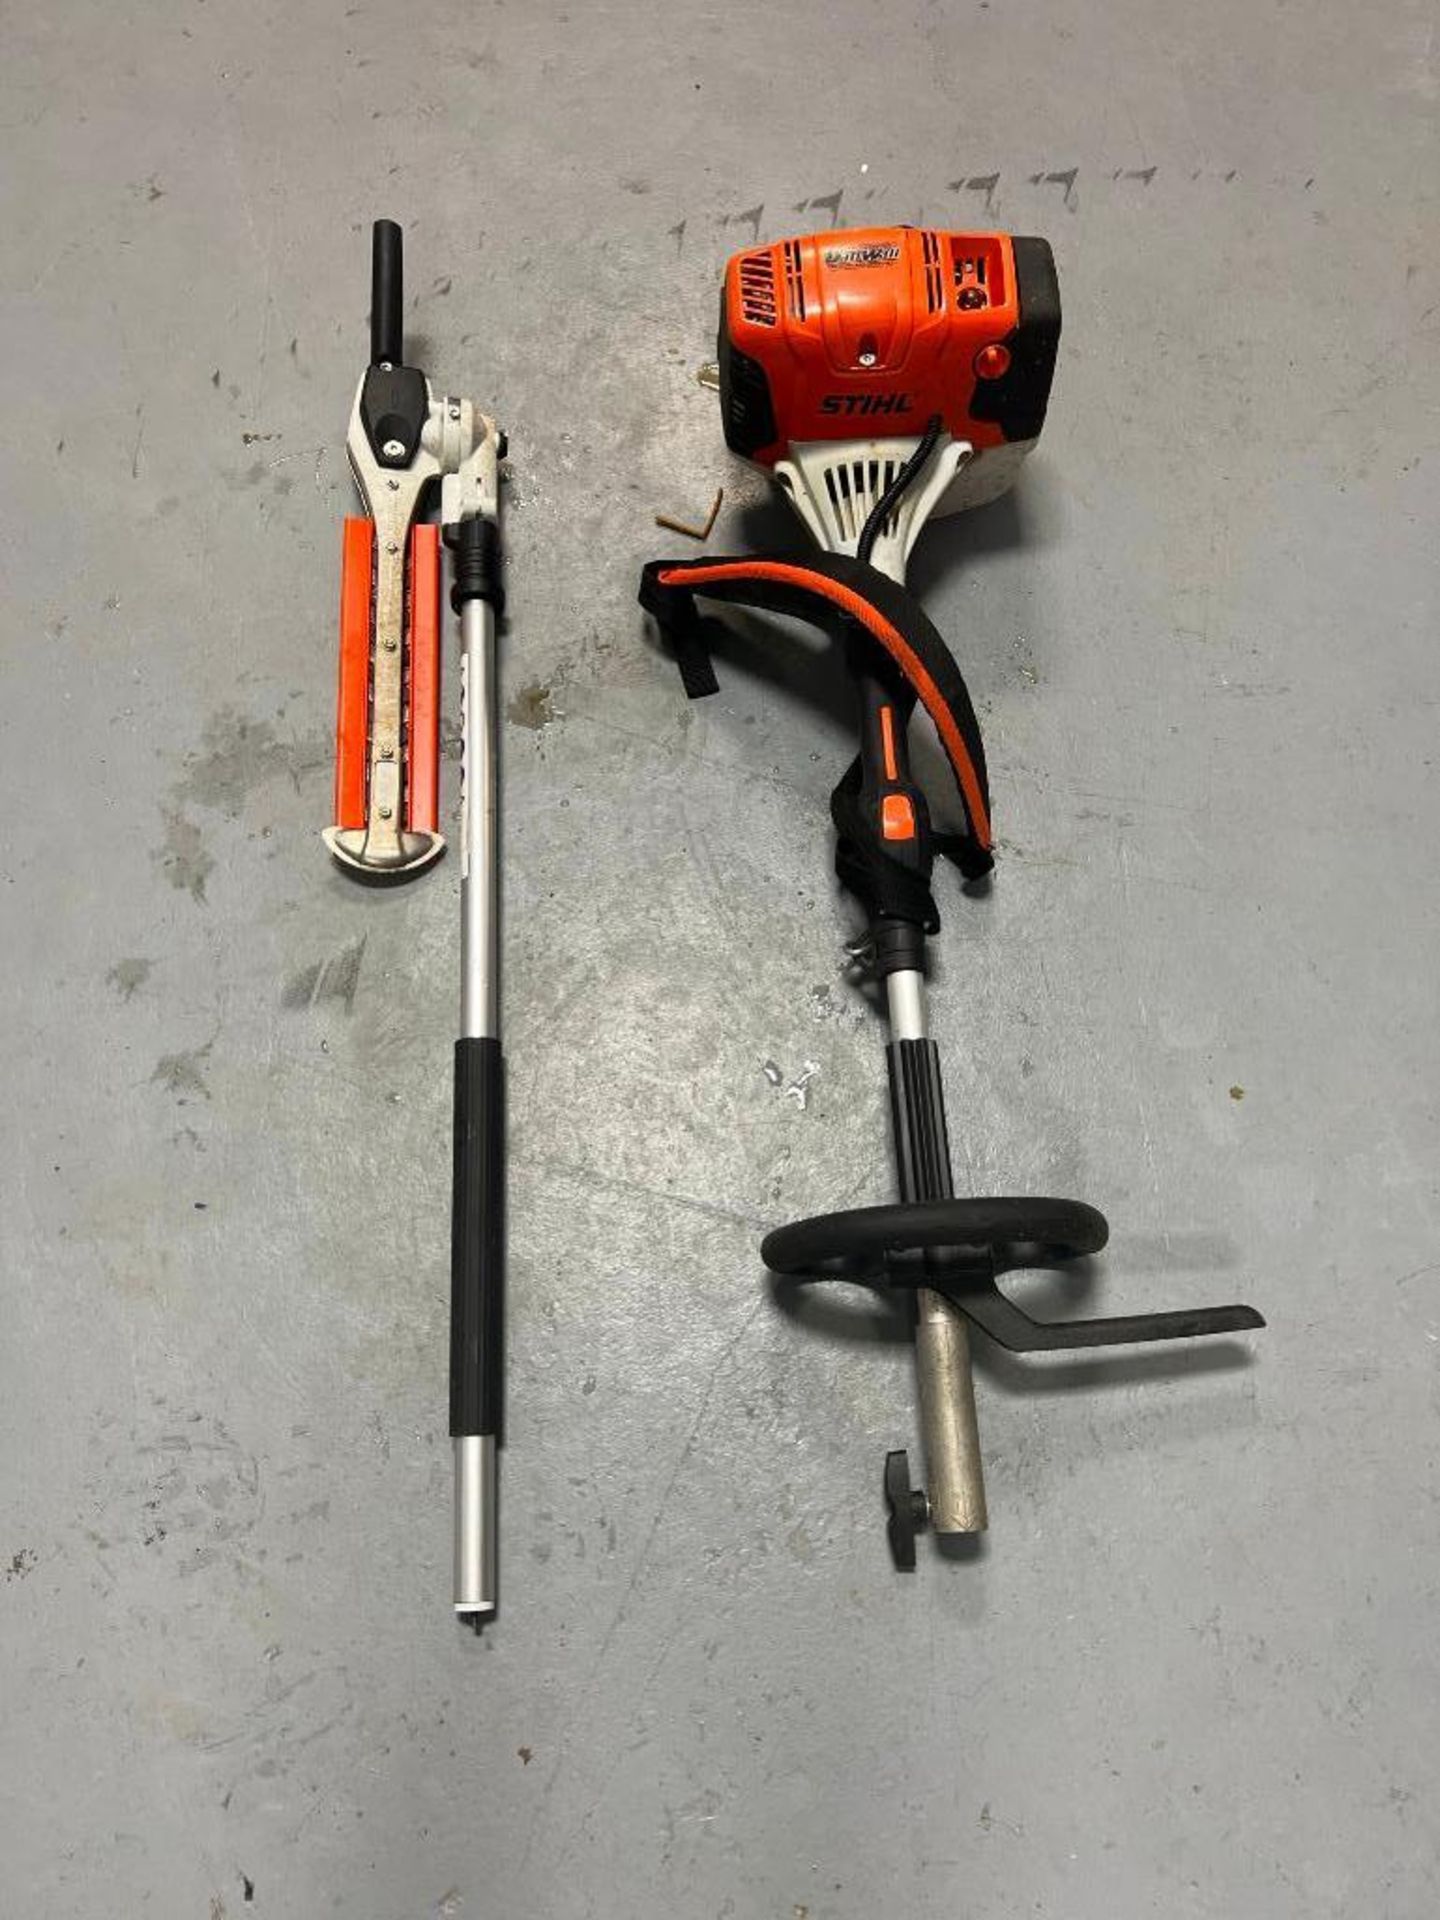 (1) Stihl KM131R with 145 Degree Adjustable Hedge Trimmer Attachment. Located in Mt. Pleasant, IA.